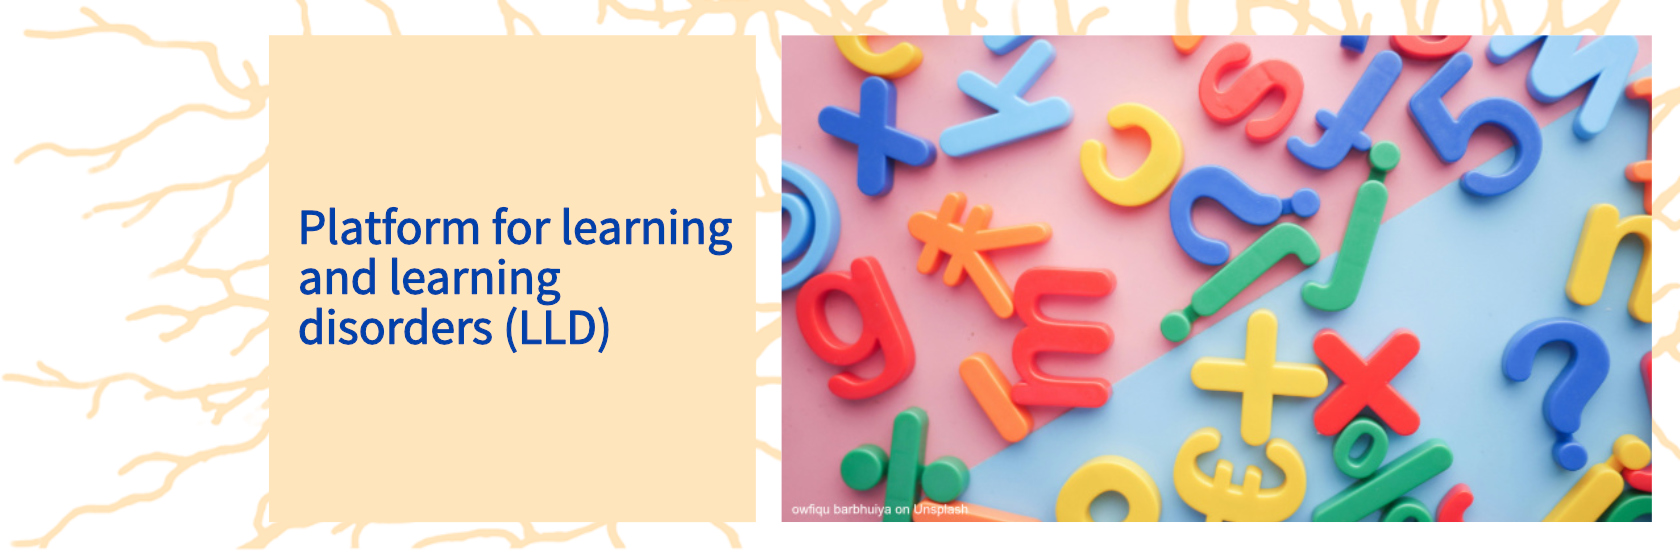 Platform for learning and learning disorders